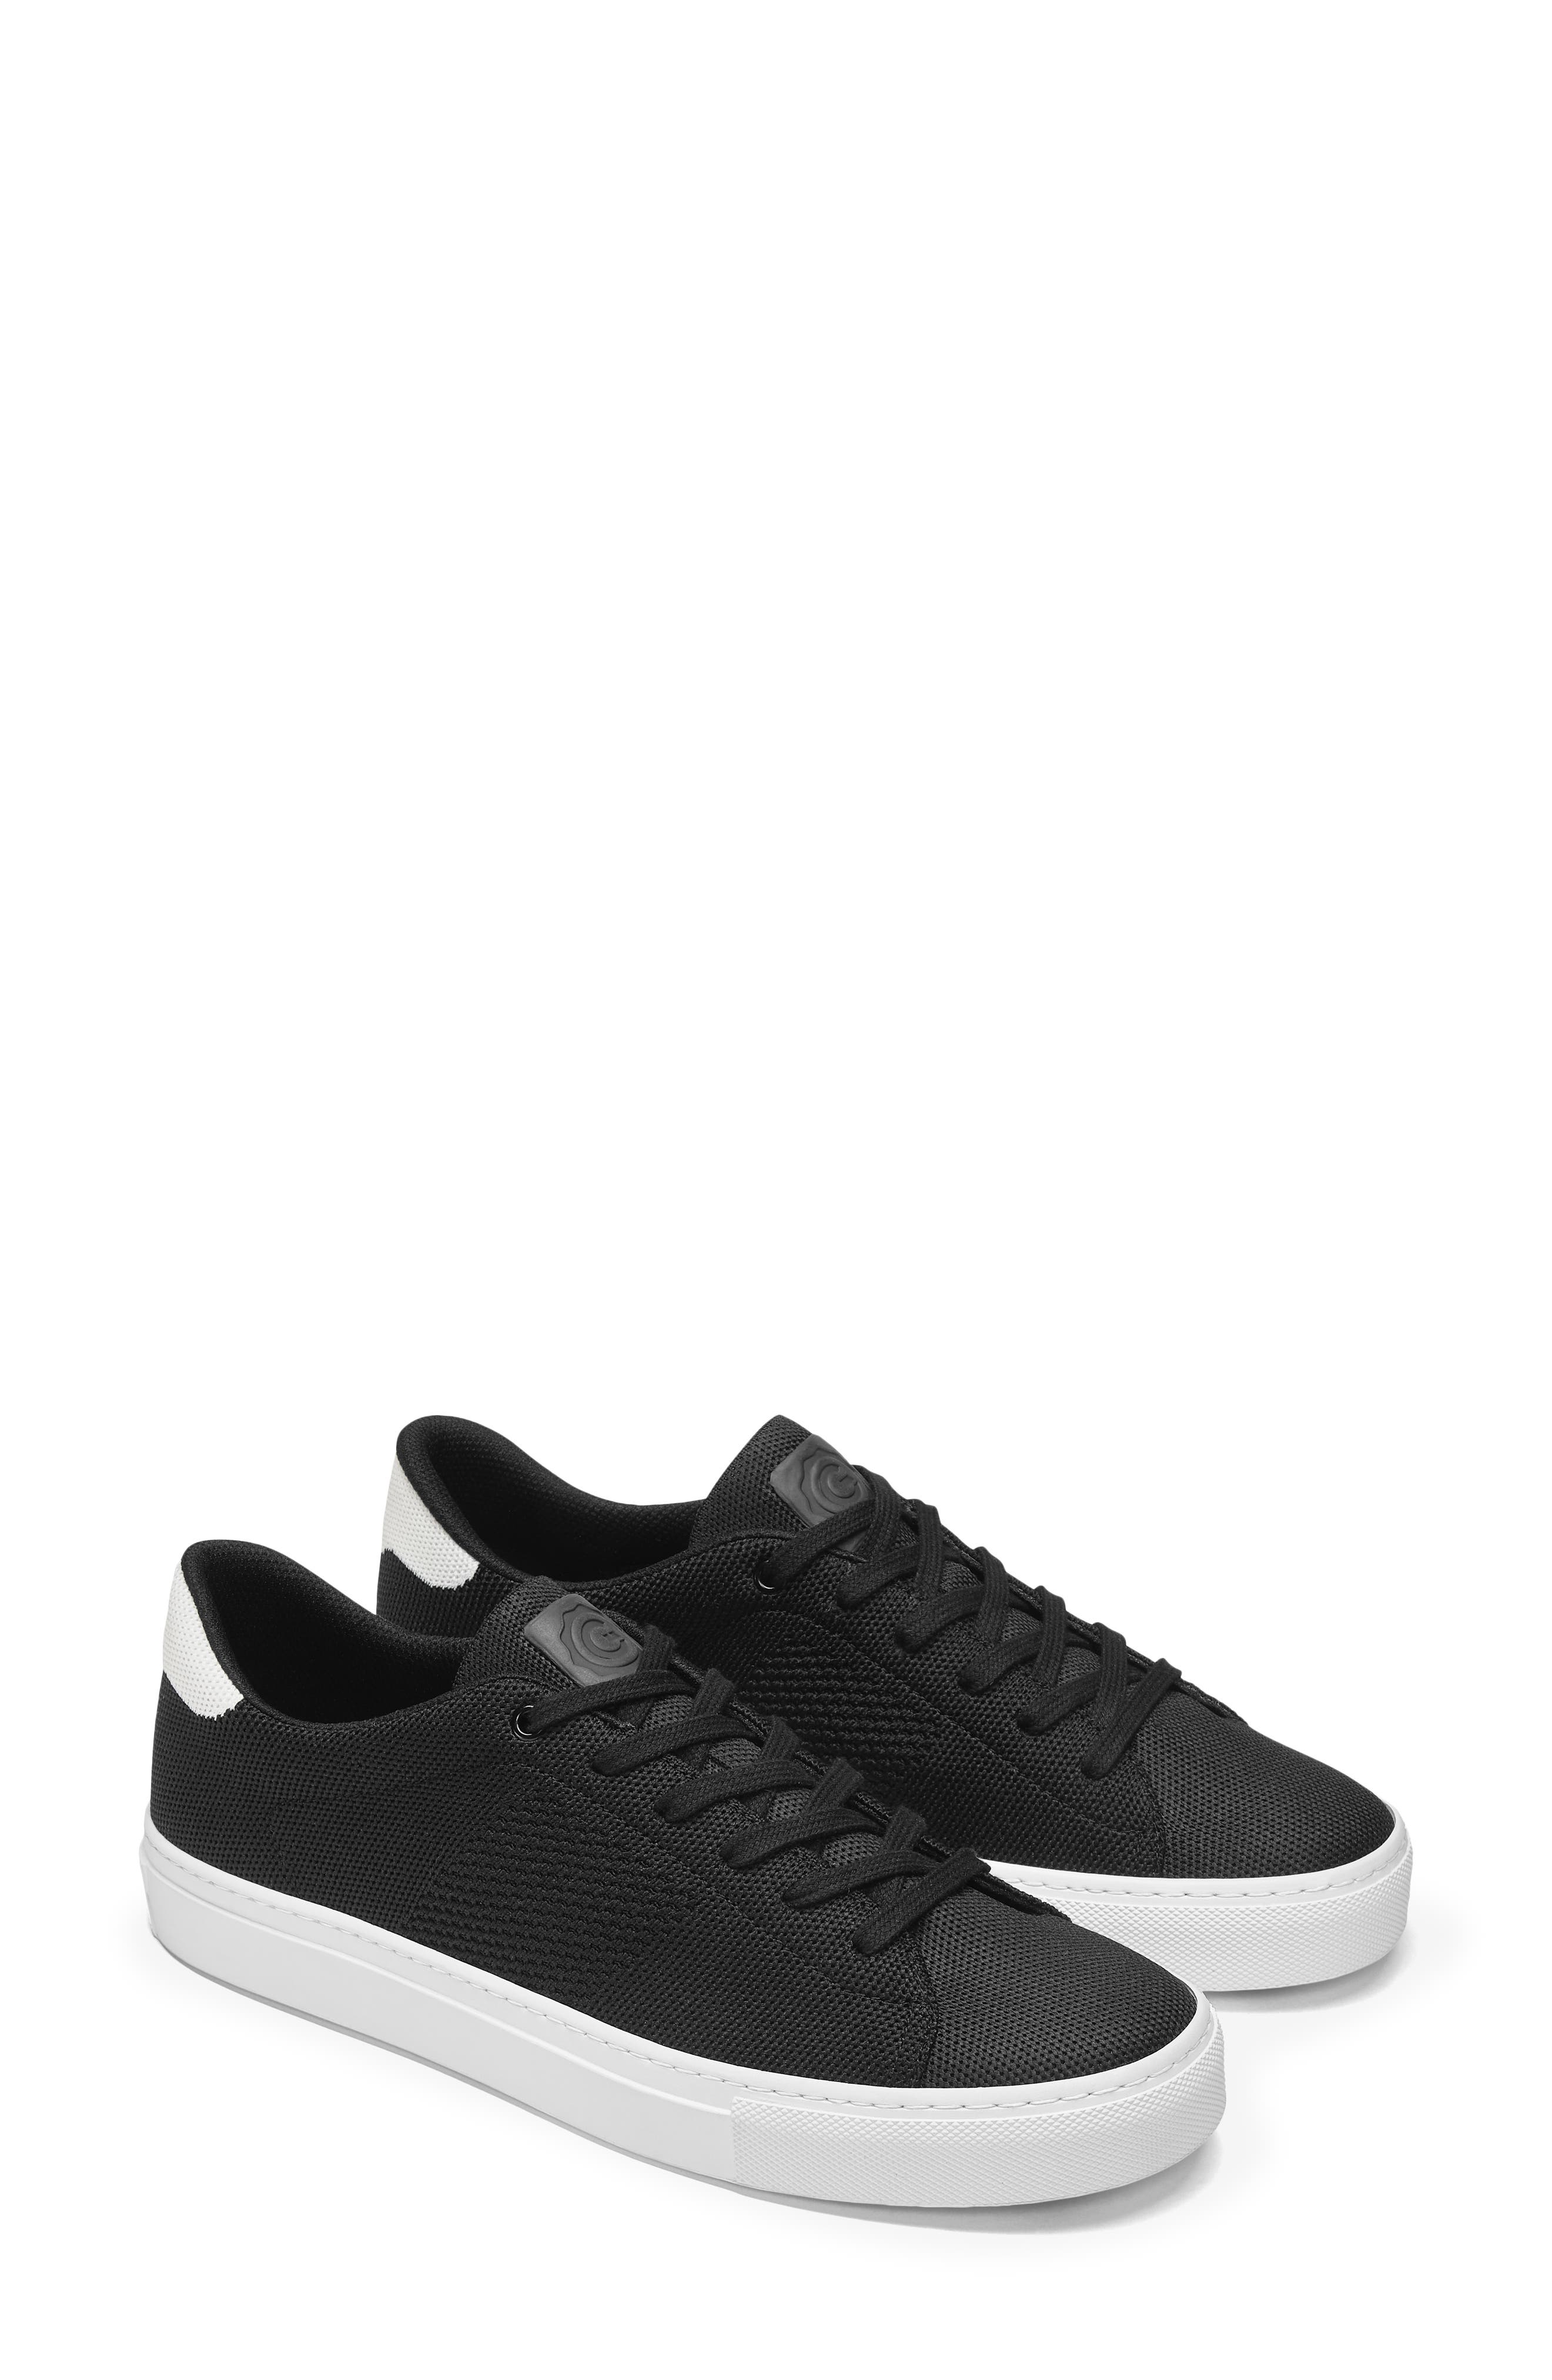 GREATS ROYALE ECO LACE UP KNIT SNEAKER,841721153060